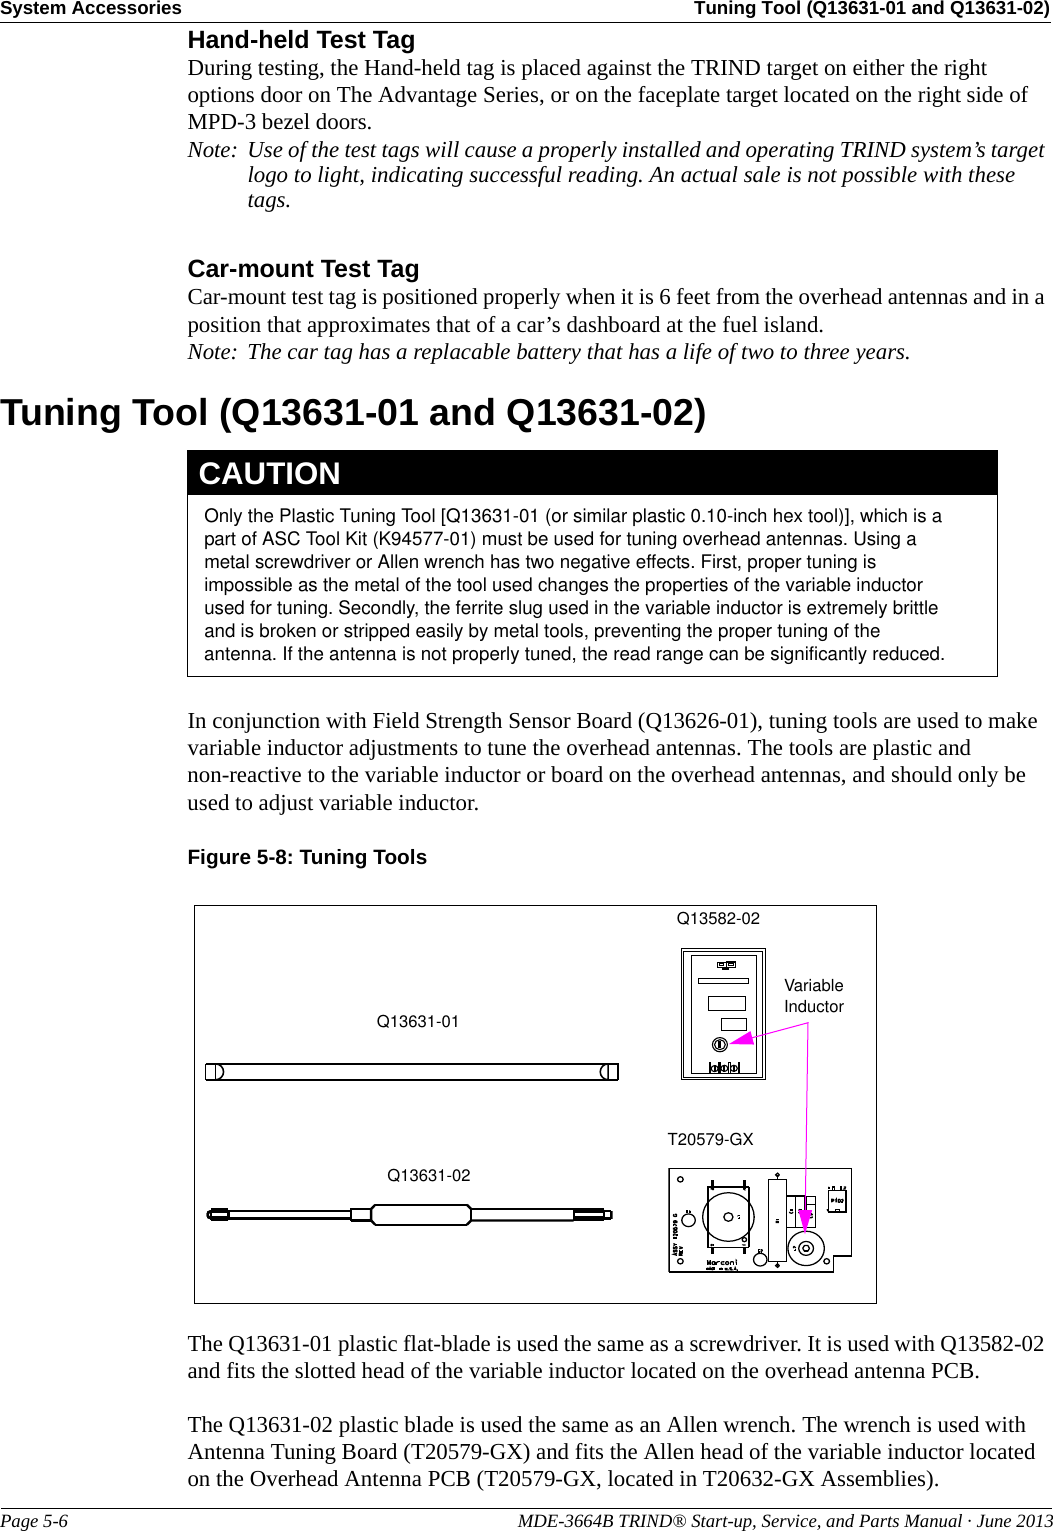 System Accessories Tuning Tool (Q13631-01 and Q13631-02)Page 5-6                                                                                                MDE-3664B TRIND® Start-up, Service, and Parts Manual · June 2013Hand-held Test TagDuring testing, the Hand-held tag is placed against the TRIND target on either the right options door on The Advantage Series, or on the faceplate target located on the right side of MPD-3 bezel doors.Note: Use of the test tags will cause a properly installed and operating TRIND system’s target logo to light, indicating successful reading. An actual sale is not possible with these tags.Car-mount Test TagCar-mount test tag is positioned properly when it is 6 feet from the overhead antennas and in a position that approximates that of a car’s dashboard at the fuel island.Note: The car tag has a replacable battery that has a life of two to three years.Tuning Tool (Q13631-01 and Q13631-02Only the Plastic Tuning Tool [Q13631-01 (or similar plastic 0.10-inch hex tool)], which is a part of ASC Tool Kit (K94577-01) must be used for tuning overhead antennas. Using a metal screwdriver or Allen wrench has two negative effects. First, proper tuning is impossible as the metal of the tool used changes the properties of the variable inductor used for tuning. Secondly, the ferrite slug used in the variable inductor is extremely brittle and is broken or stripped easily by metal tools, preventing the proper tuning of the antenna. If the antenna is not properly tuned, the read range can be significantly reduced.CAUTION)In conjunction with Field Strength Sensor Board (Q13626-01), tuning tools are used to make variable inductor adjustments to tune the overhead antennas. The tools are plastic and non-reactive to the variable inductor or board on the overhead antennas, and should only be used to adjust variable inductor.Figure 5-8: Tuning Tools Q13631-01Q13631-02Variable InductorQ13582-02T20579-GXThe Q13631-01 plastic flat-blade is used the same as a screwdriver. It is used with Q13582-02 and fits the slotted head of the variable inductor located on the overhead antenna PCB.The Q13631-02 plastic blade is used the same as an Allen wrench. The wrench is used with Antenna Tuning Board (T20579-GX) and fits the Allen head of the variable inductor located on the Overhead Antenna PCB (T20579-GX, located in T20632-GX Assemblies).